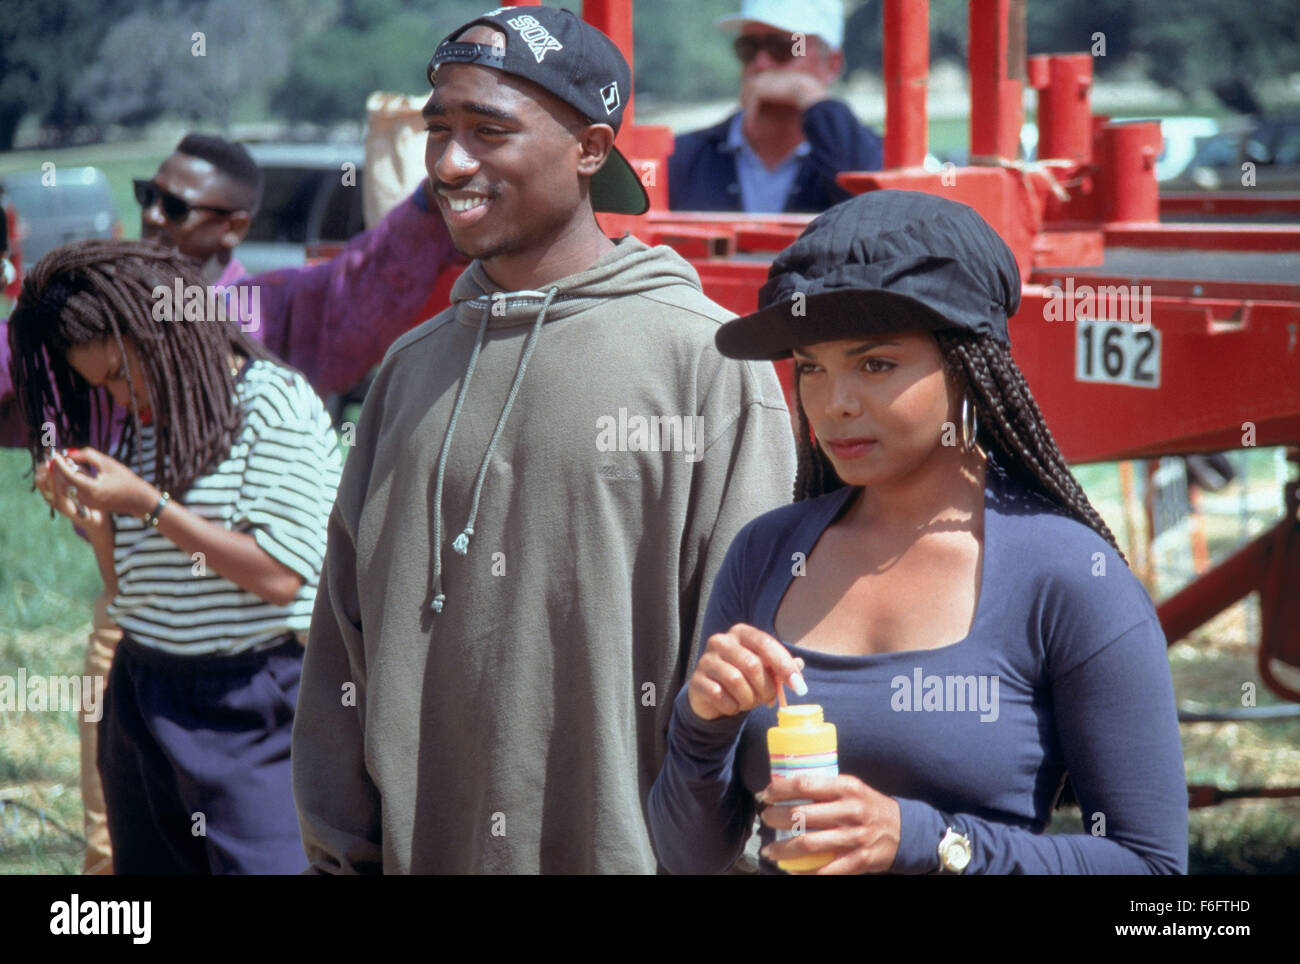 RELEASE DATE: 23 July 1993. MOVIE TITLE: Poetic Justice. STUDIO: Columbia Pictures Corporation. PLOT: In this film, we see the world through the eyes of main character Justice, a young African-American poet. PICTURED: TUPAC SHAKUR as Lucky and JANET JACKSON as Justice. Stock Photo